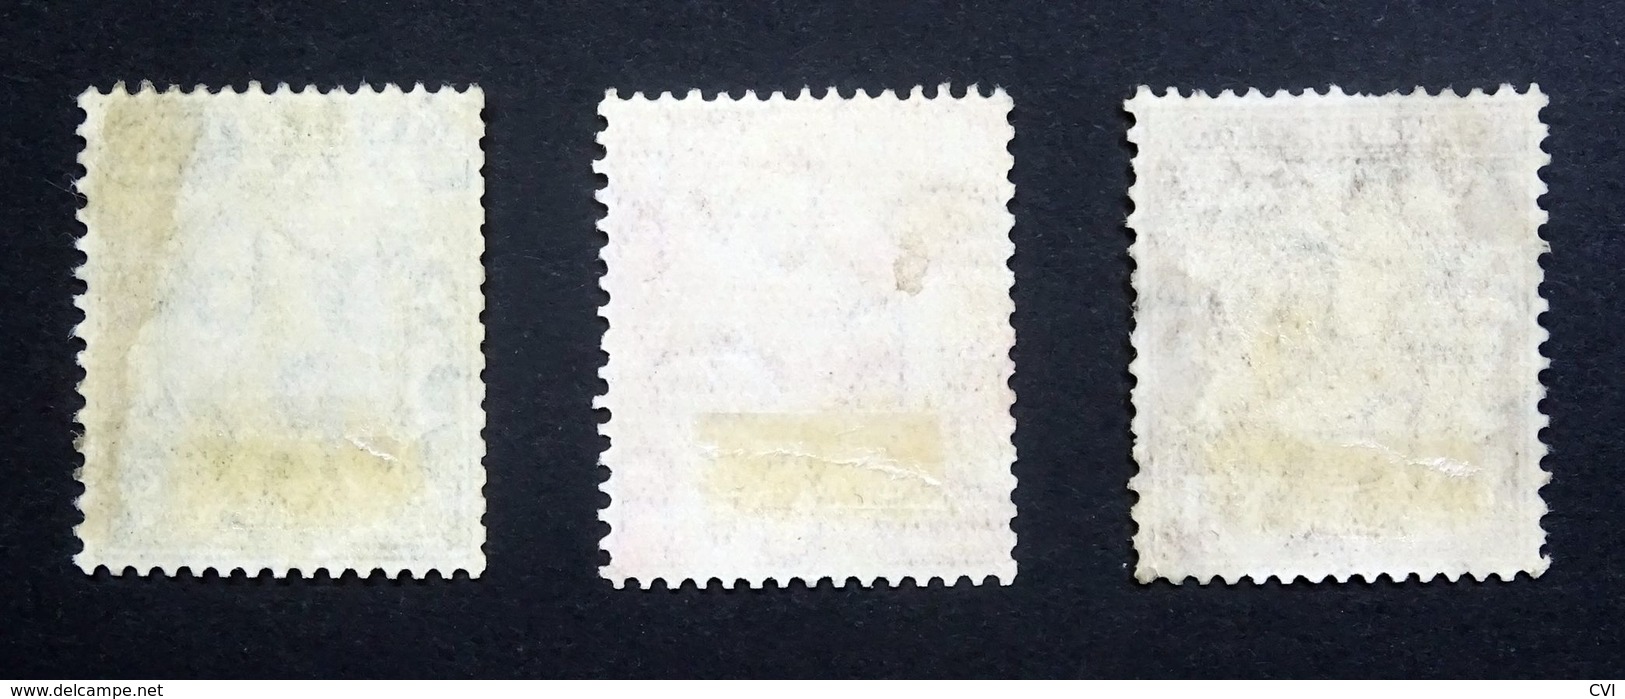 GB KGV 1924-26  SG418,419,420/Sc.#187,188,189  1/2d To 1 1/2d, Wmk 111 Block Cypher INVERTED, Used. (3 Stamps) - Oblitérés